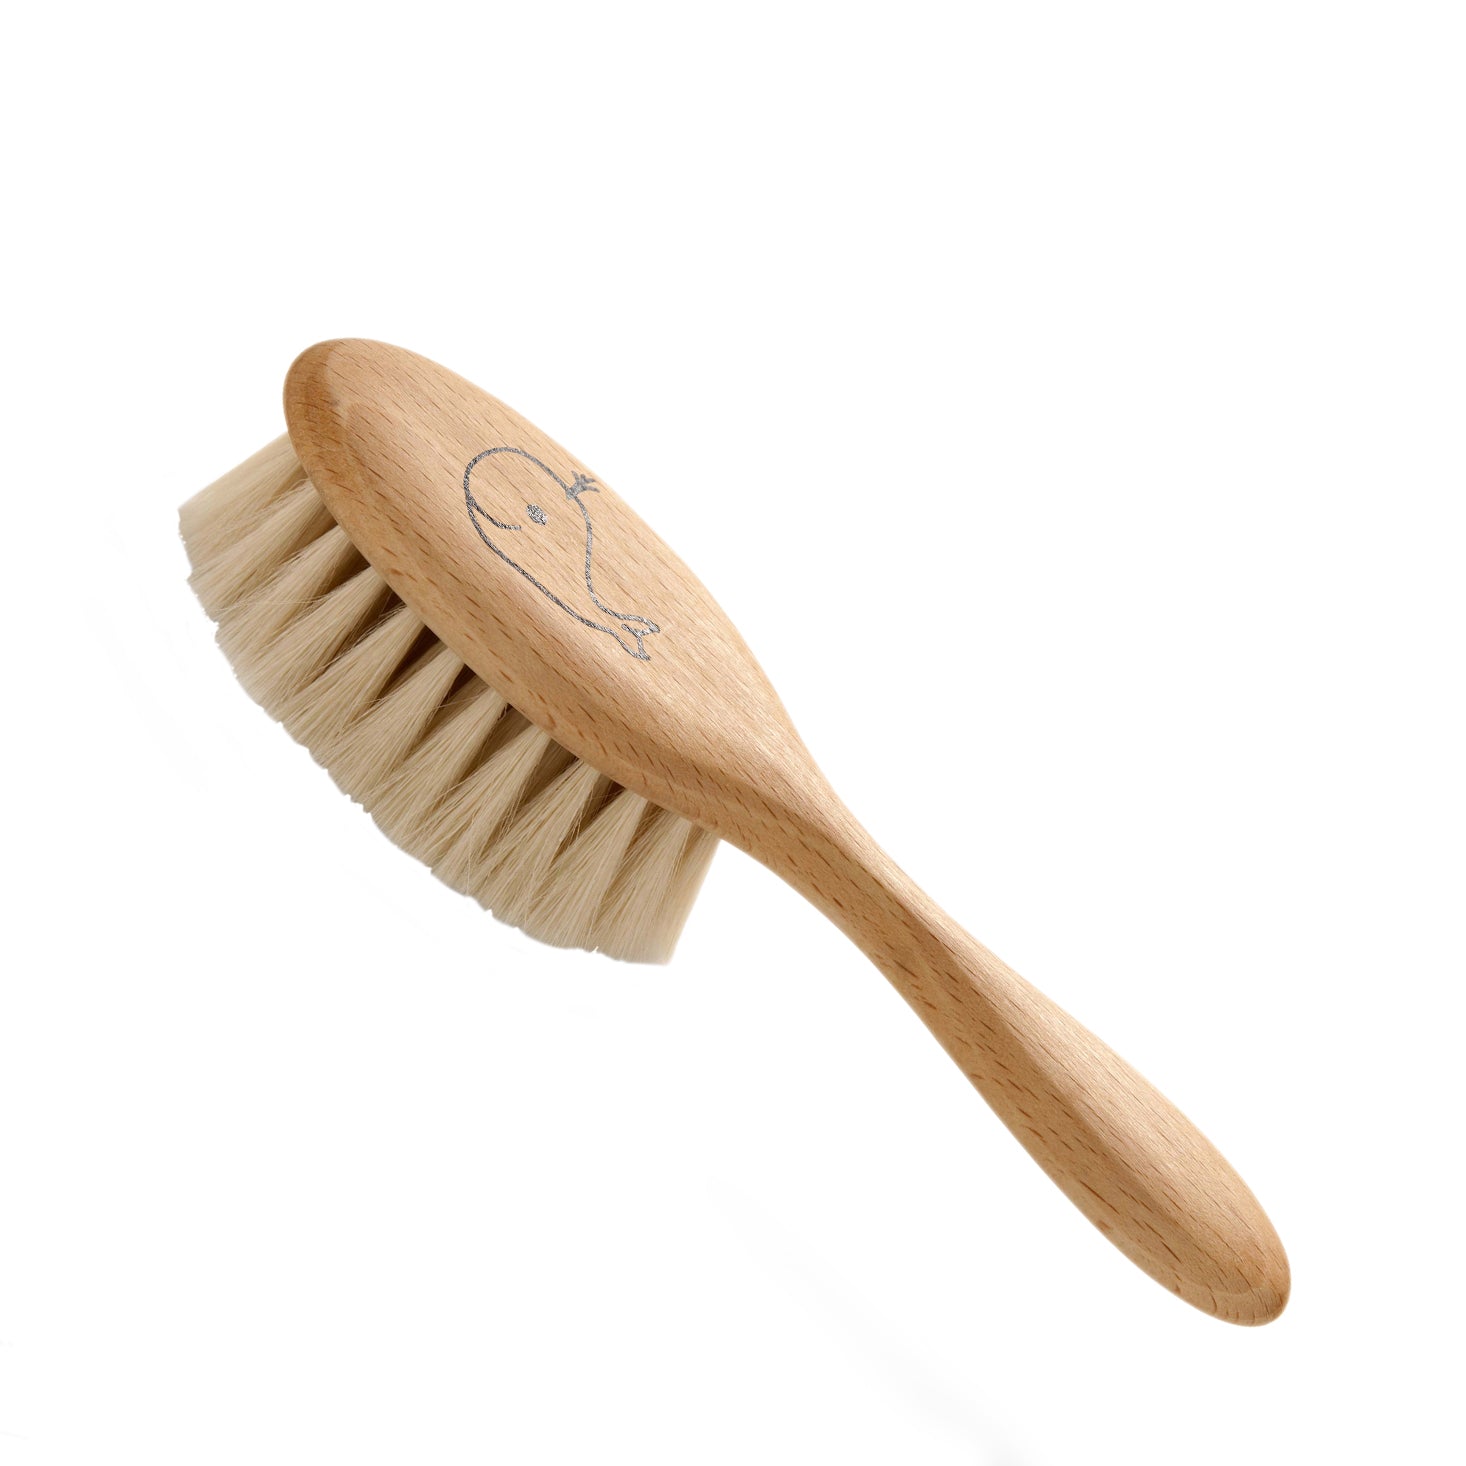 3 Piece Baby Hair Brush And Comb Set For Newborn  Natural Wooden Hairbrush  With Soft Goat Bristles For Cradle Cap  Perfect Scalp Grooming Pr  Fruugo  IN